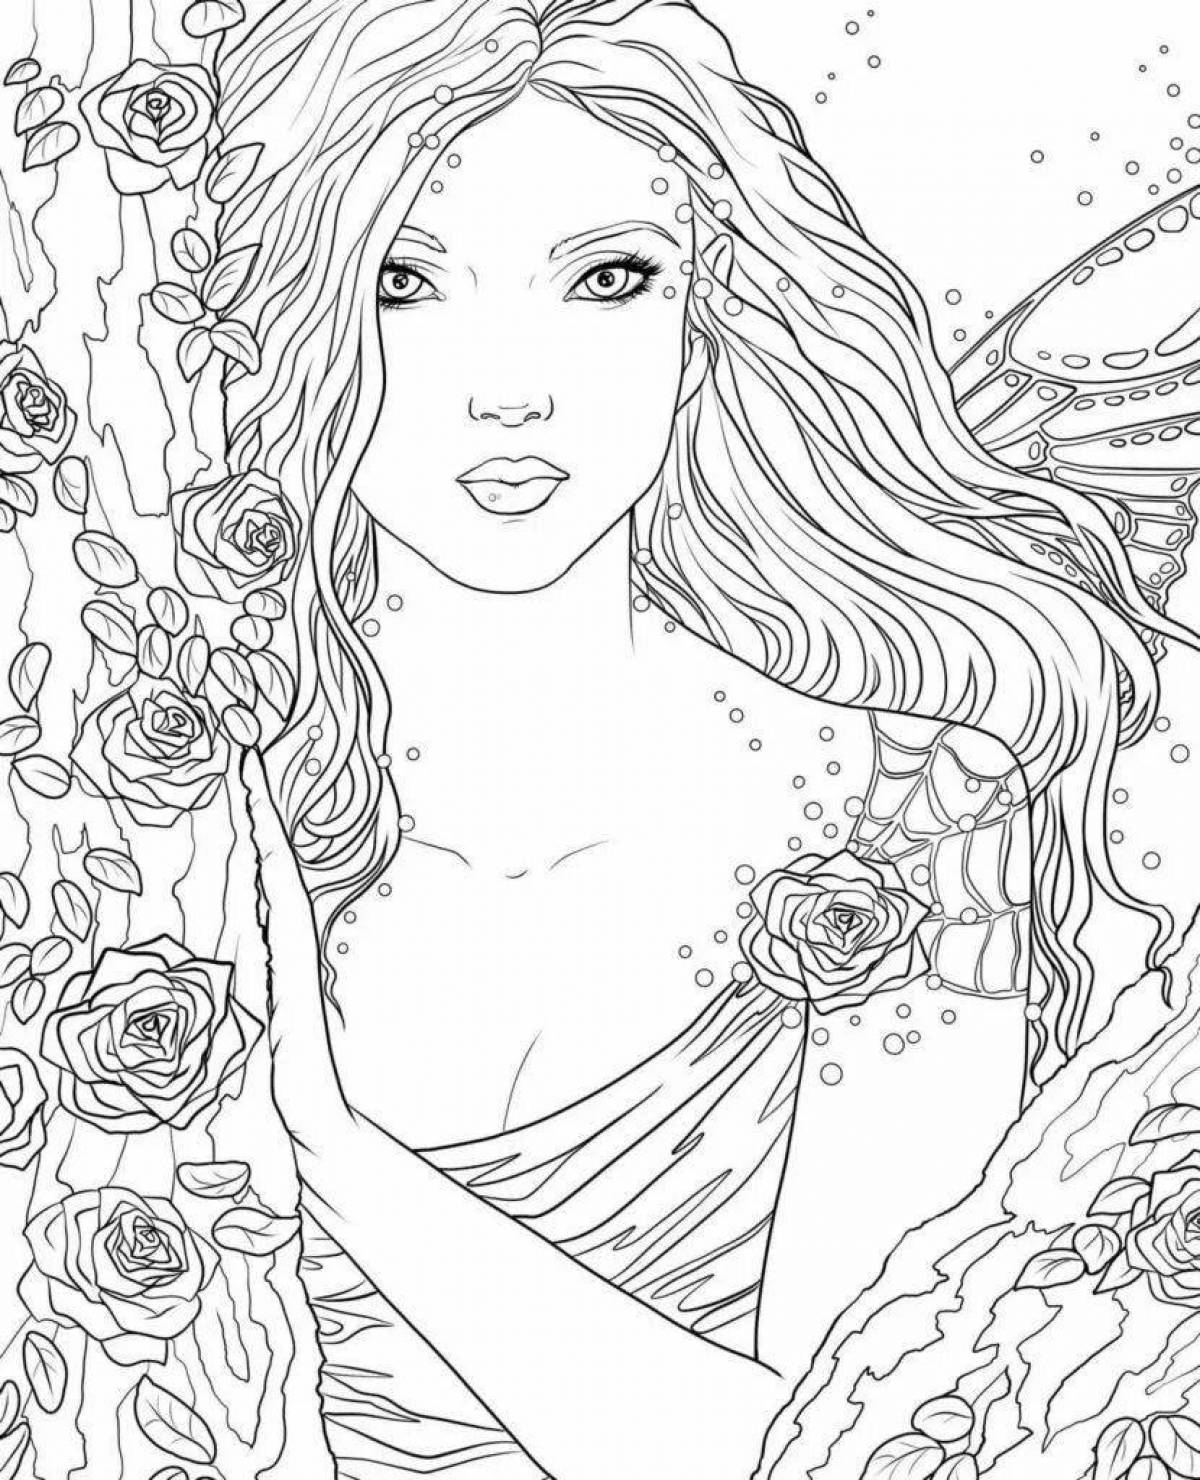 Adorable coloring book for 18 year old girls